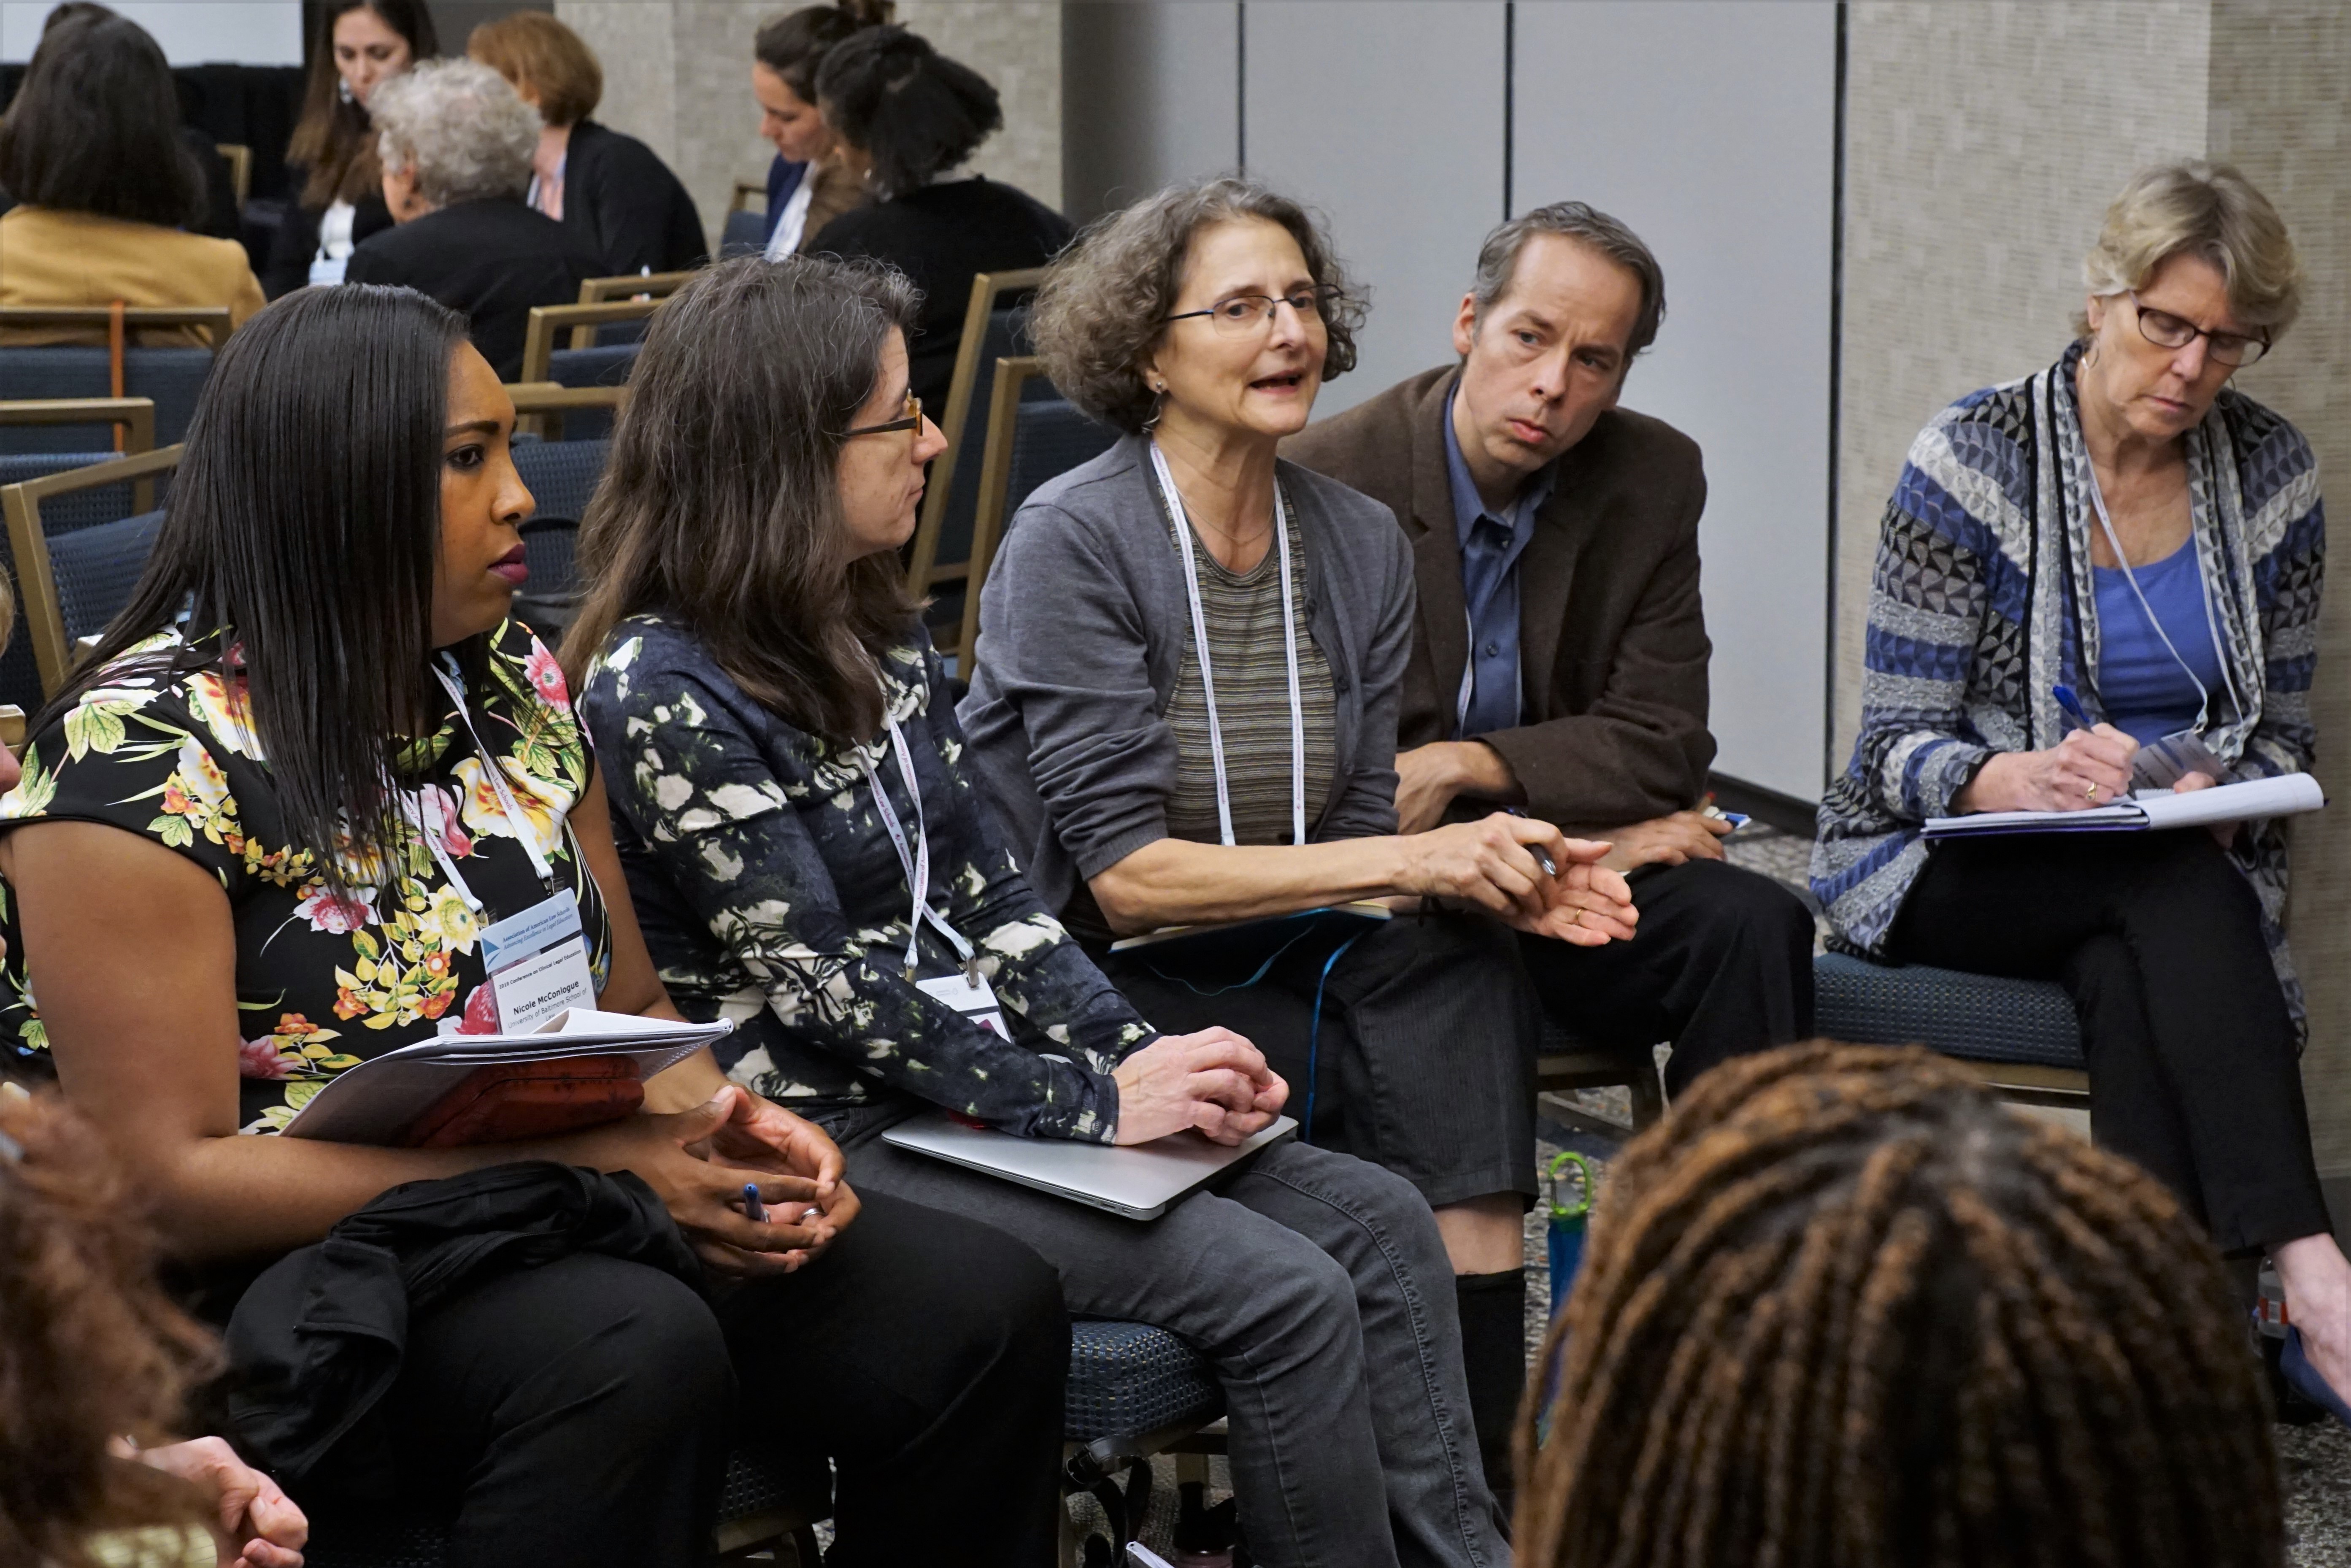 Attendees during a working session on addressing implicit bias.